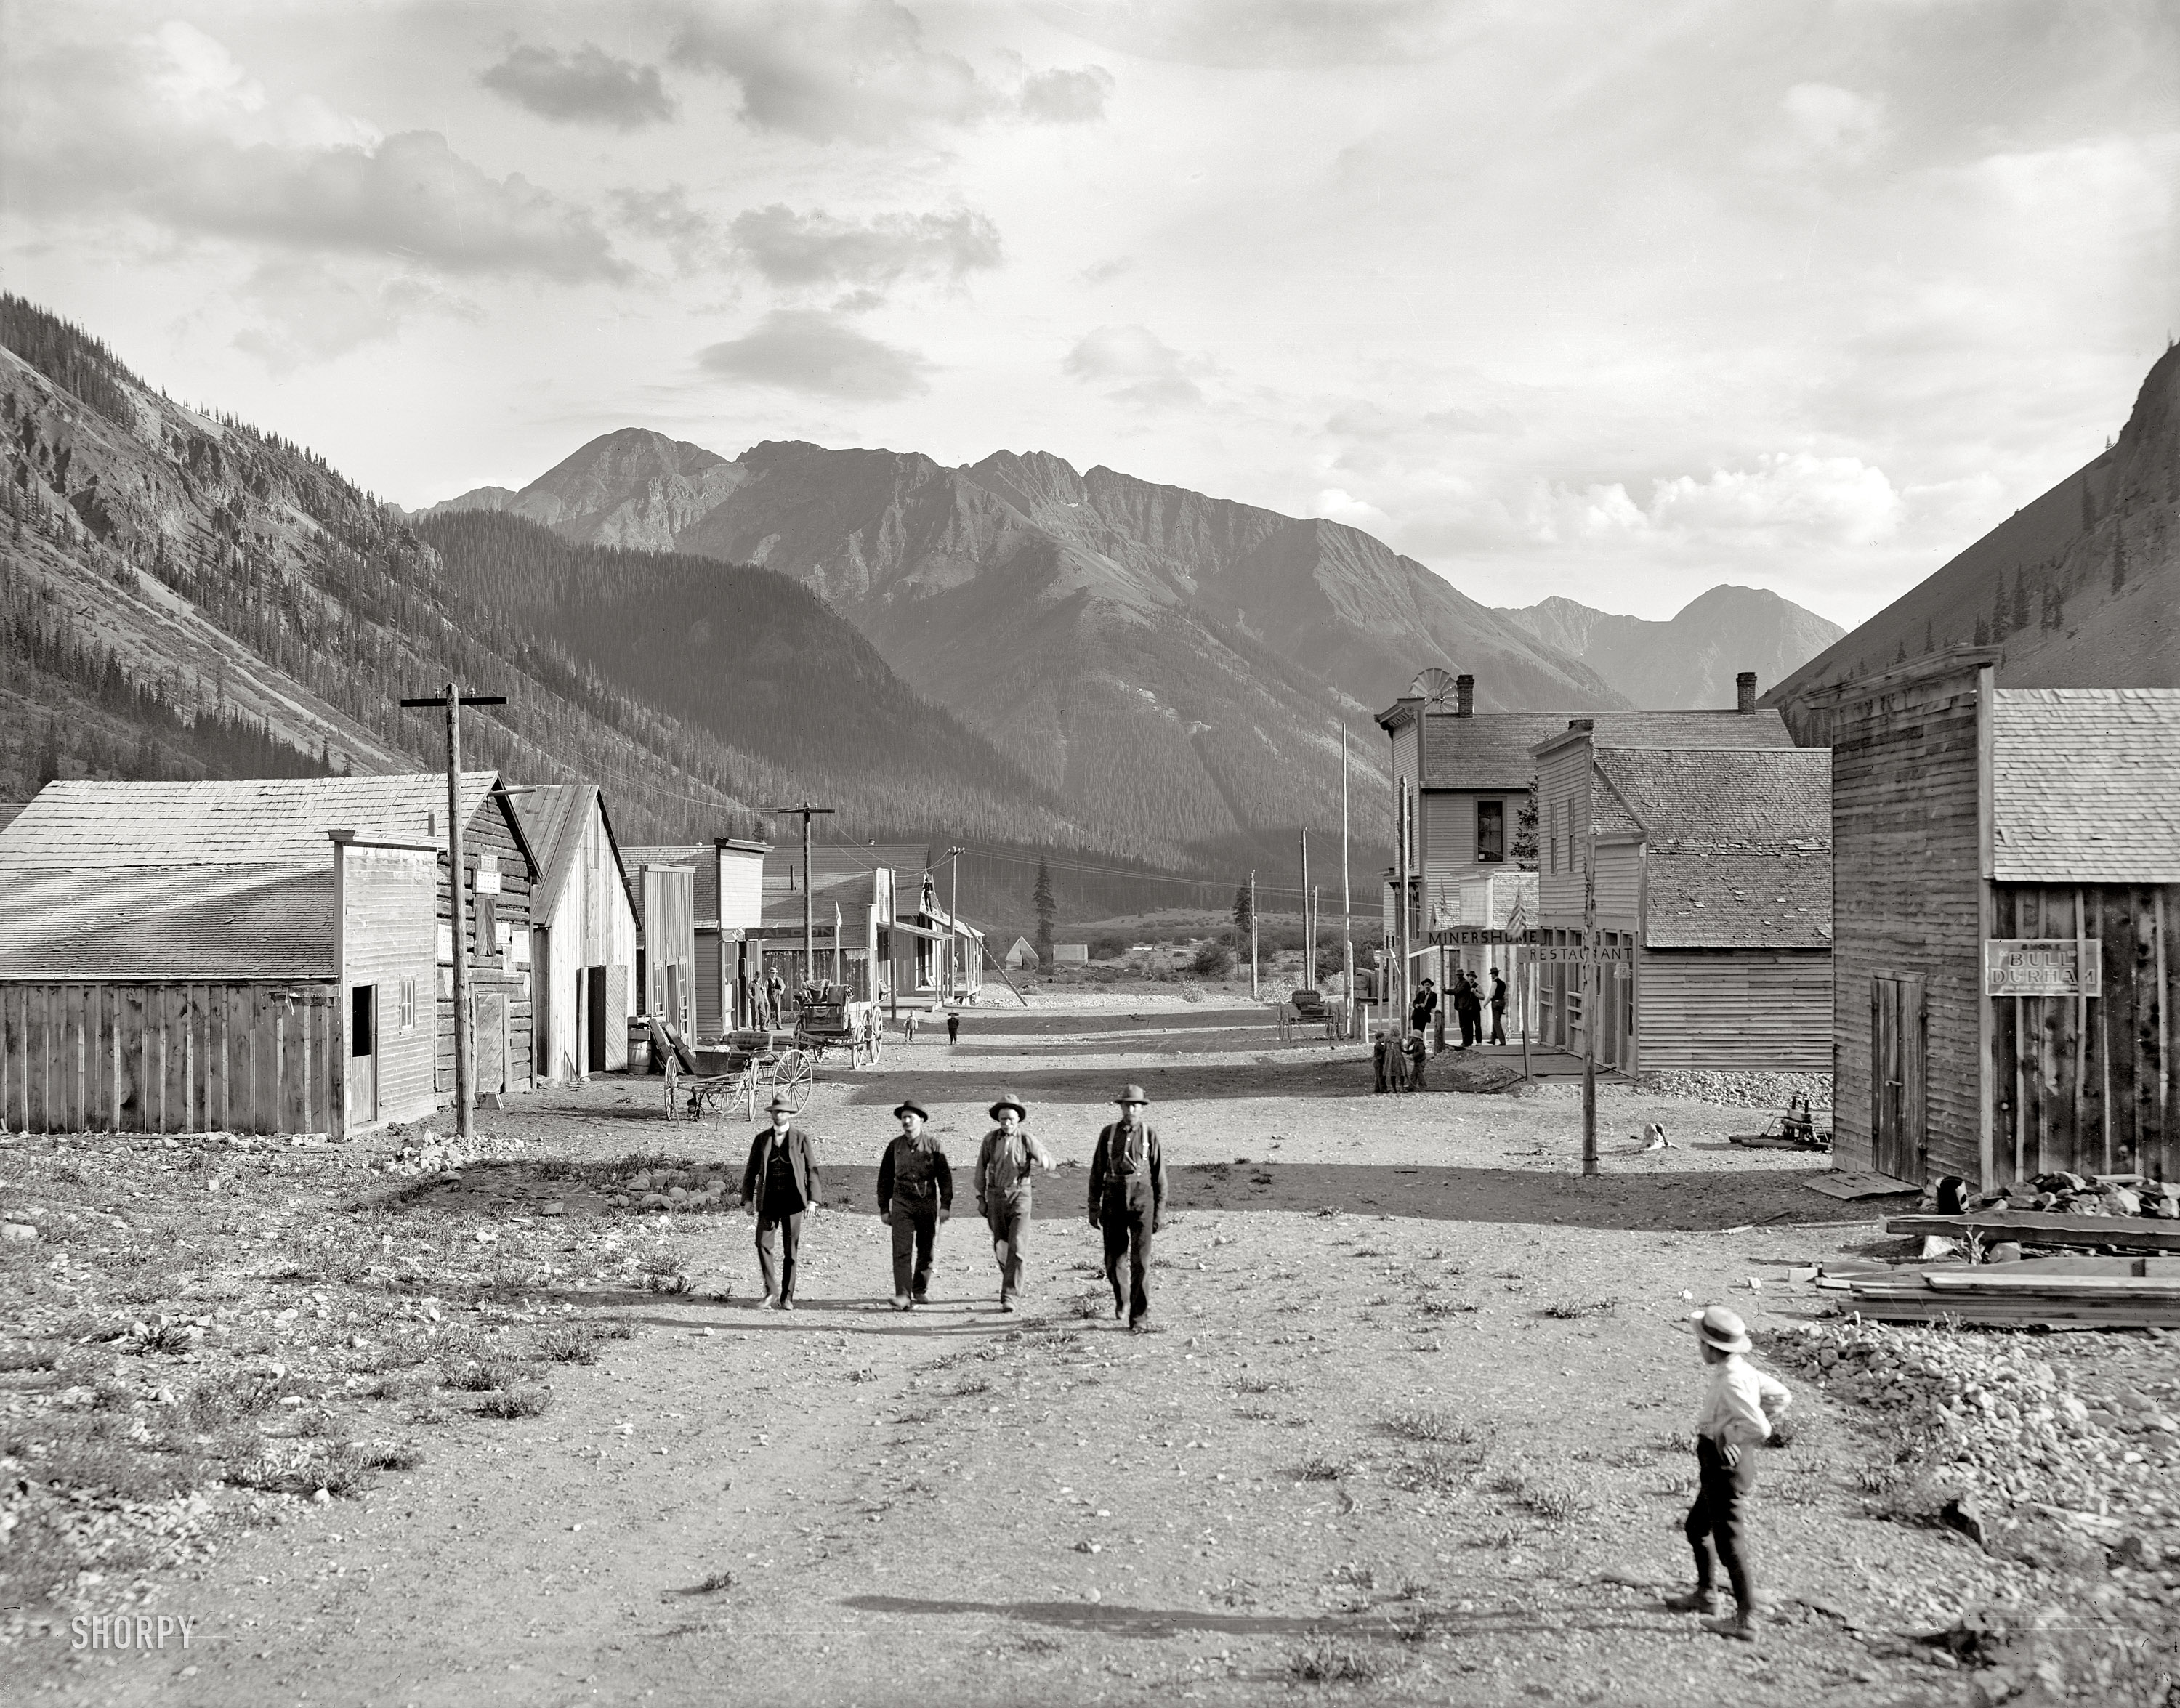 Eureka, Colorado, circa 1900. 8x10 inch dry plate glass negative by William Henry Jackson. Detroit Publishing Company. View full size.